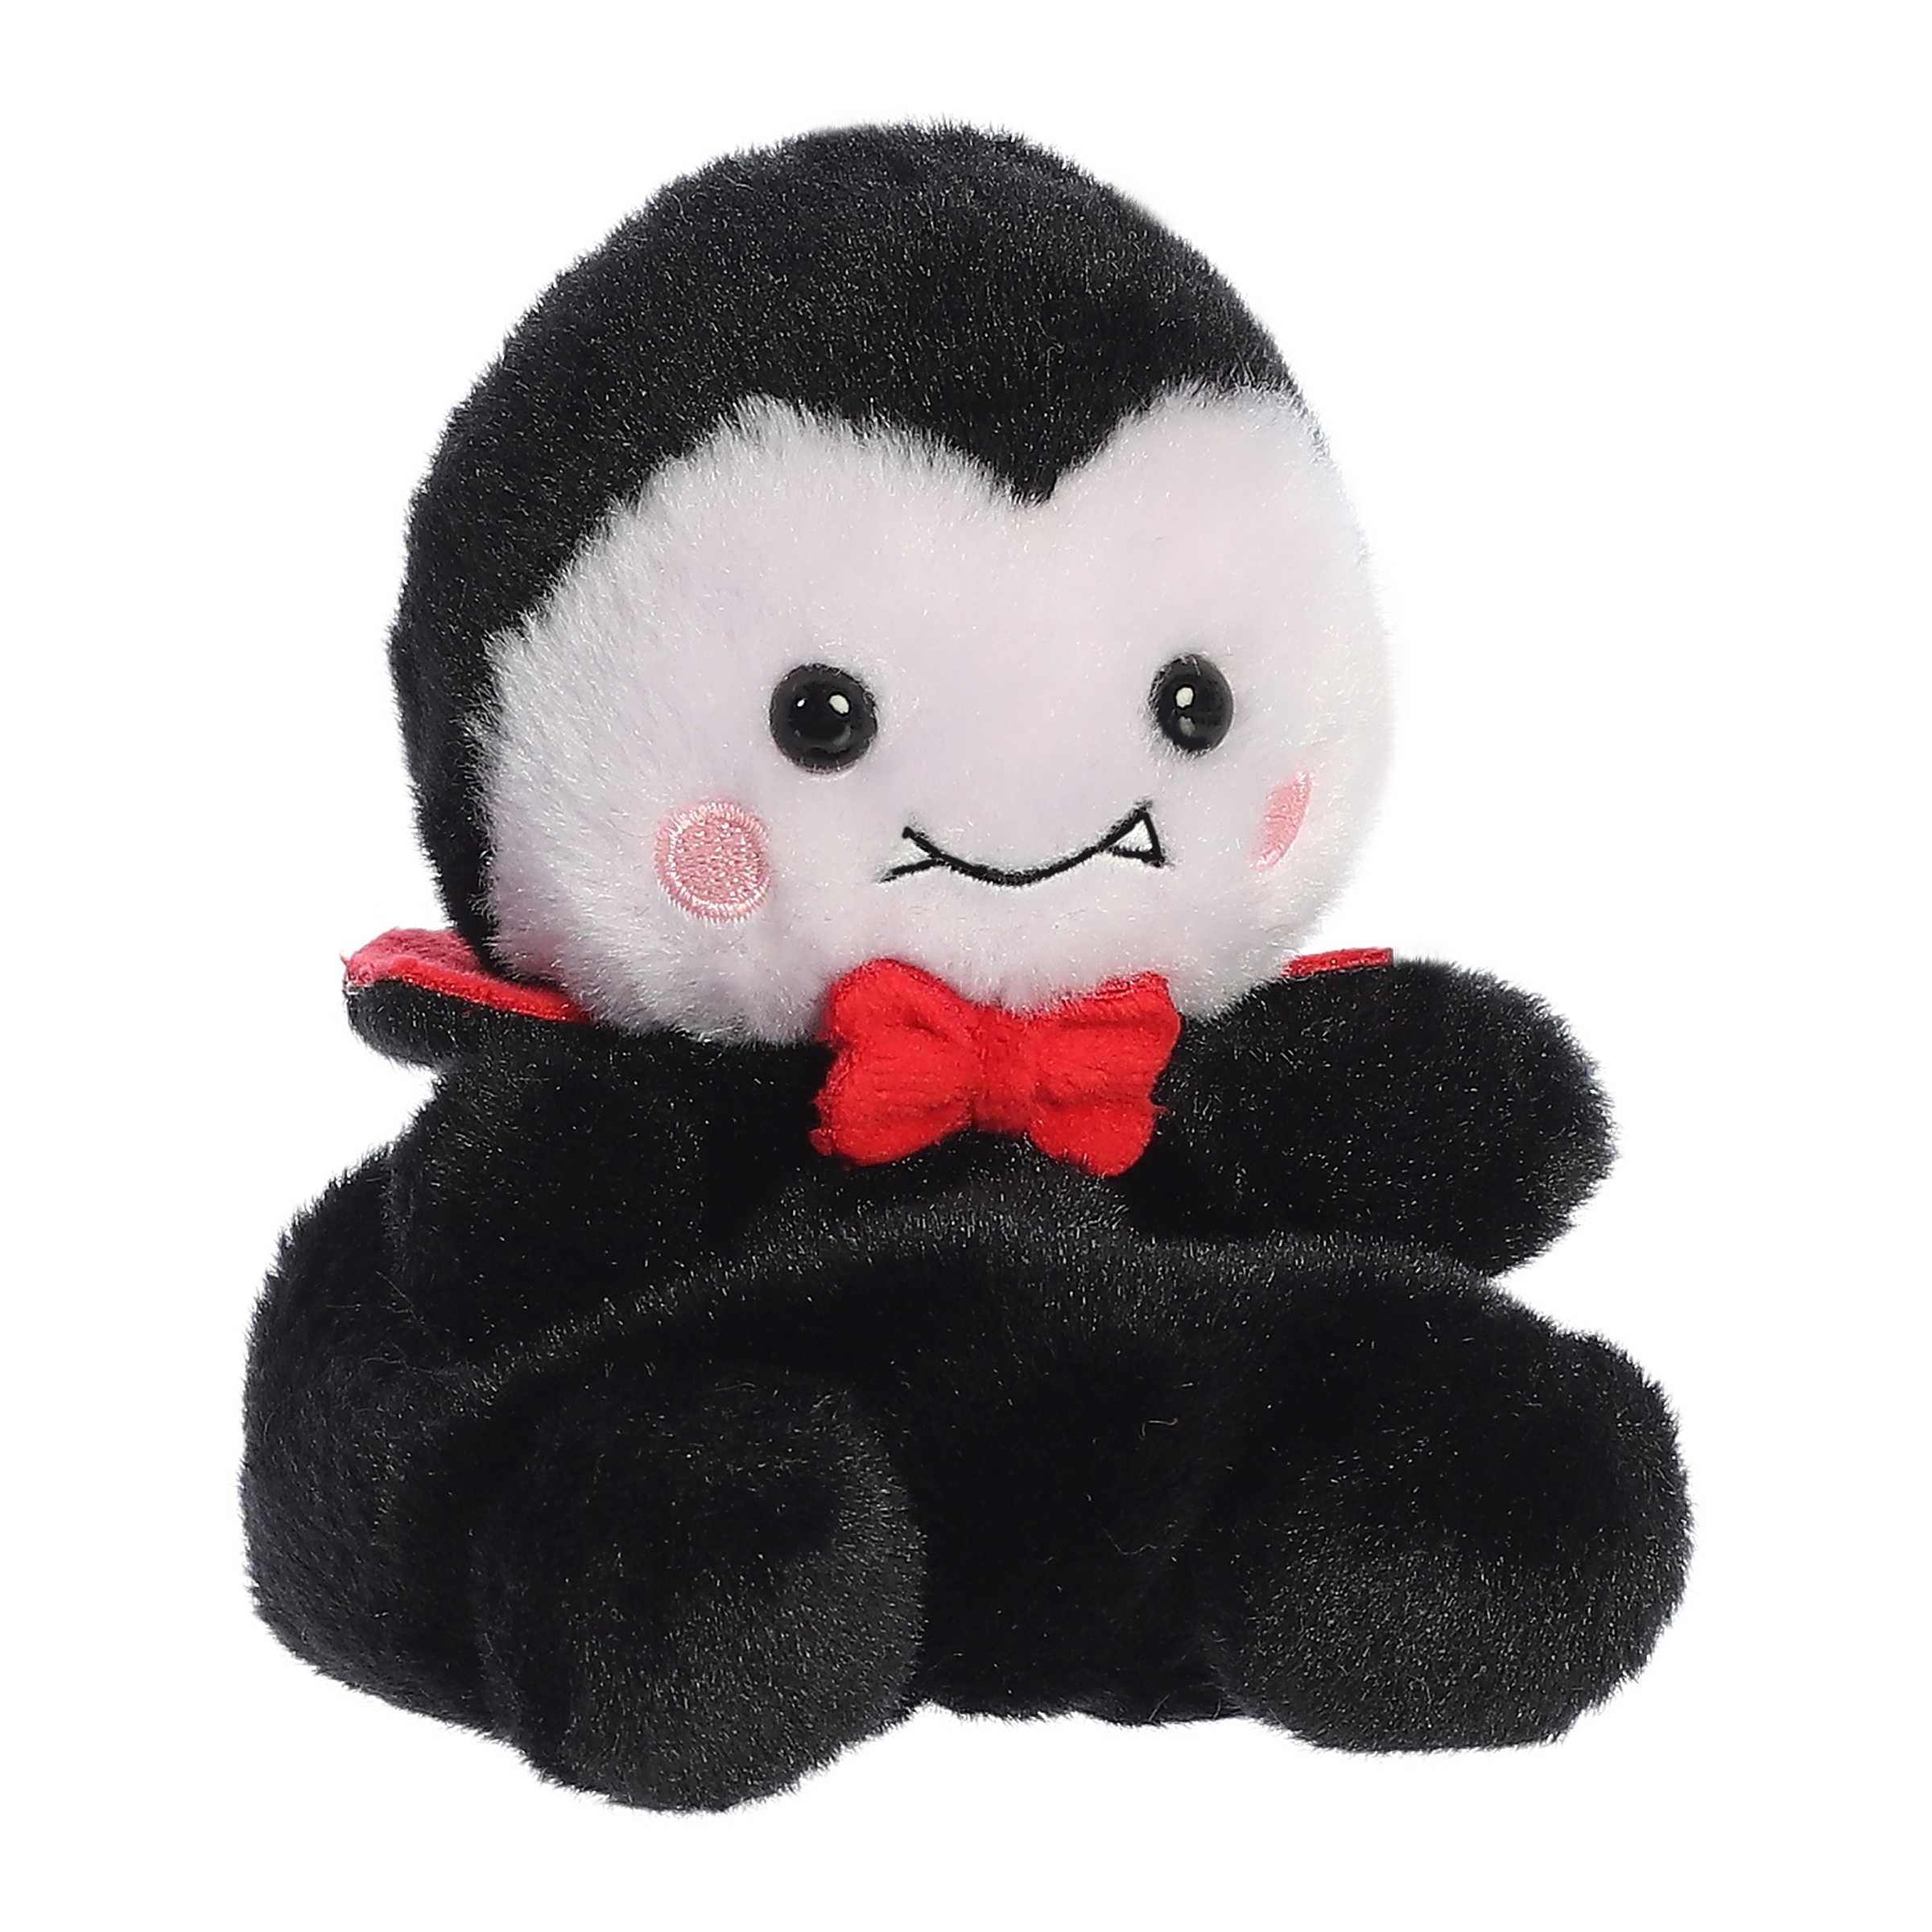 Aurora® Spooky Palm Pals™ Viktor Vampire™ Stuffed Animal - Pocket-Sized Play - Collectable Fun - Black 5 Inches